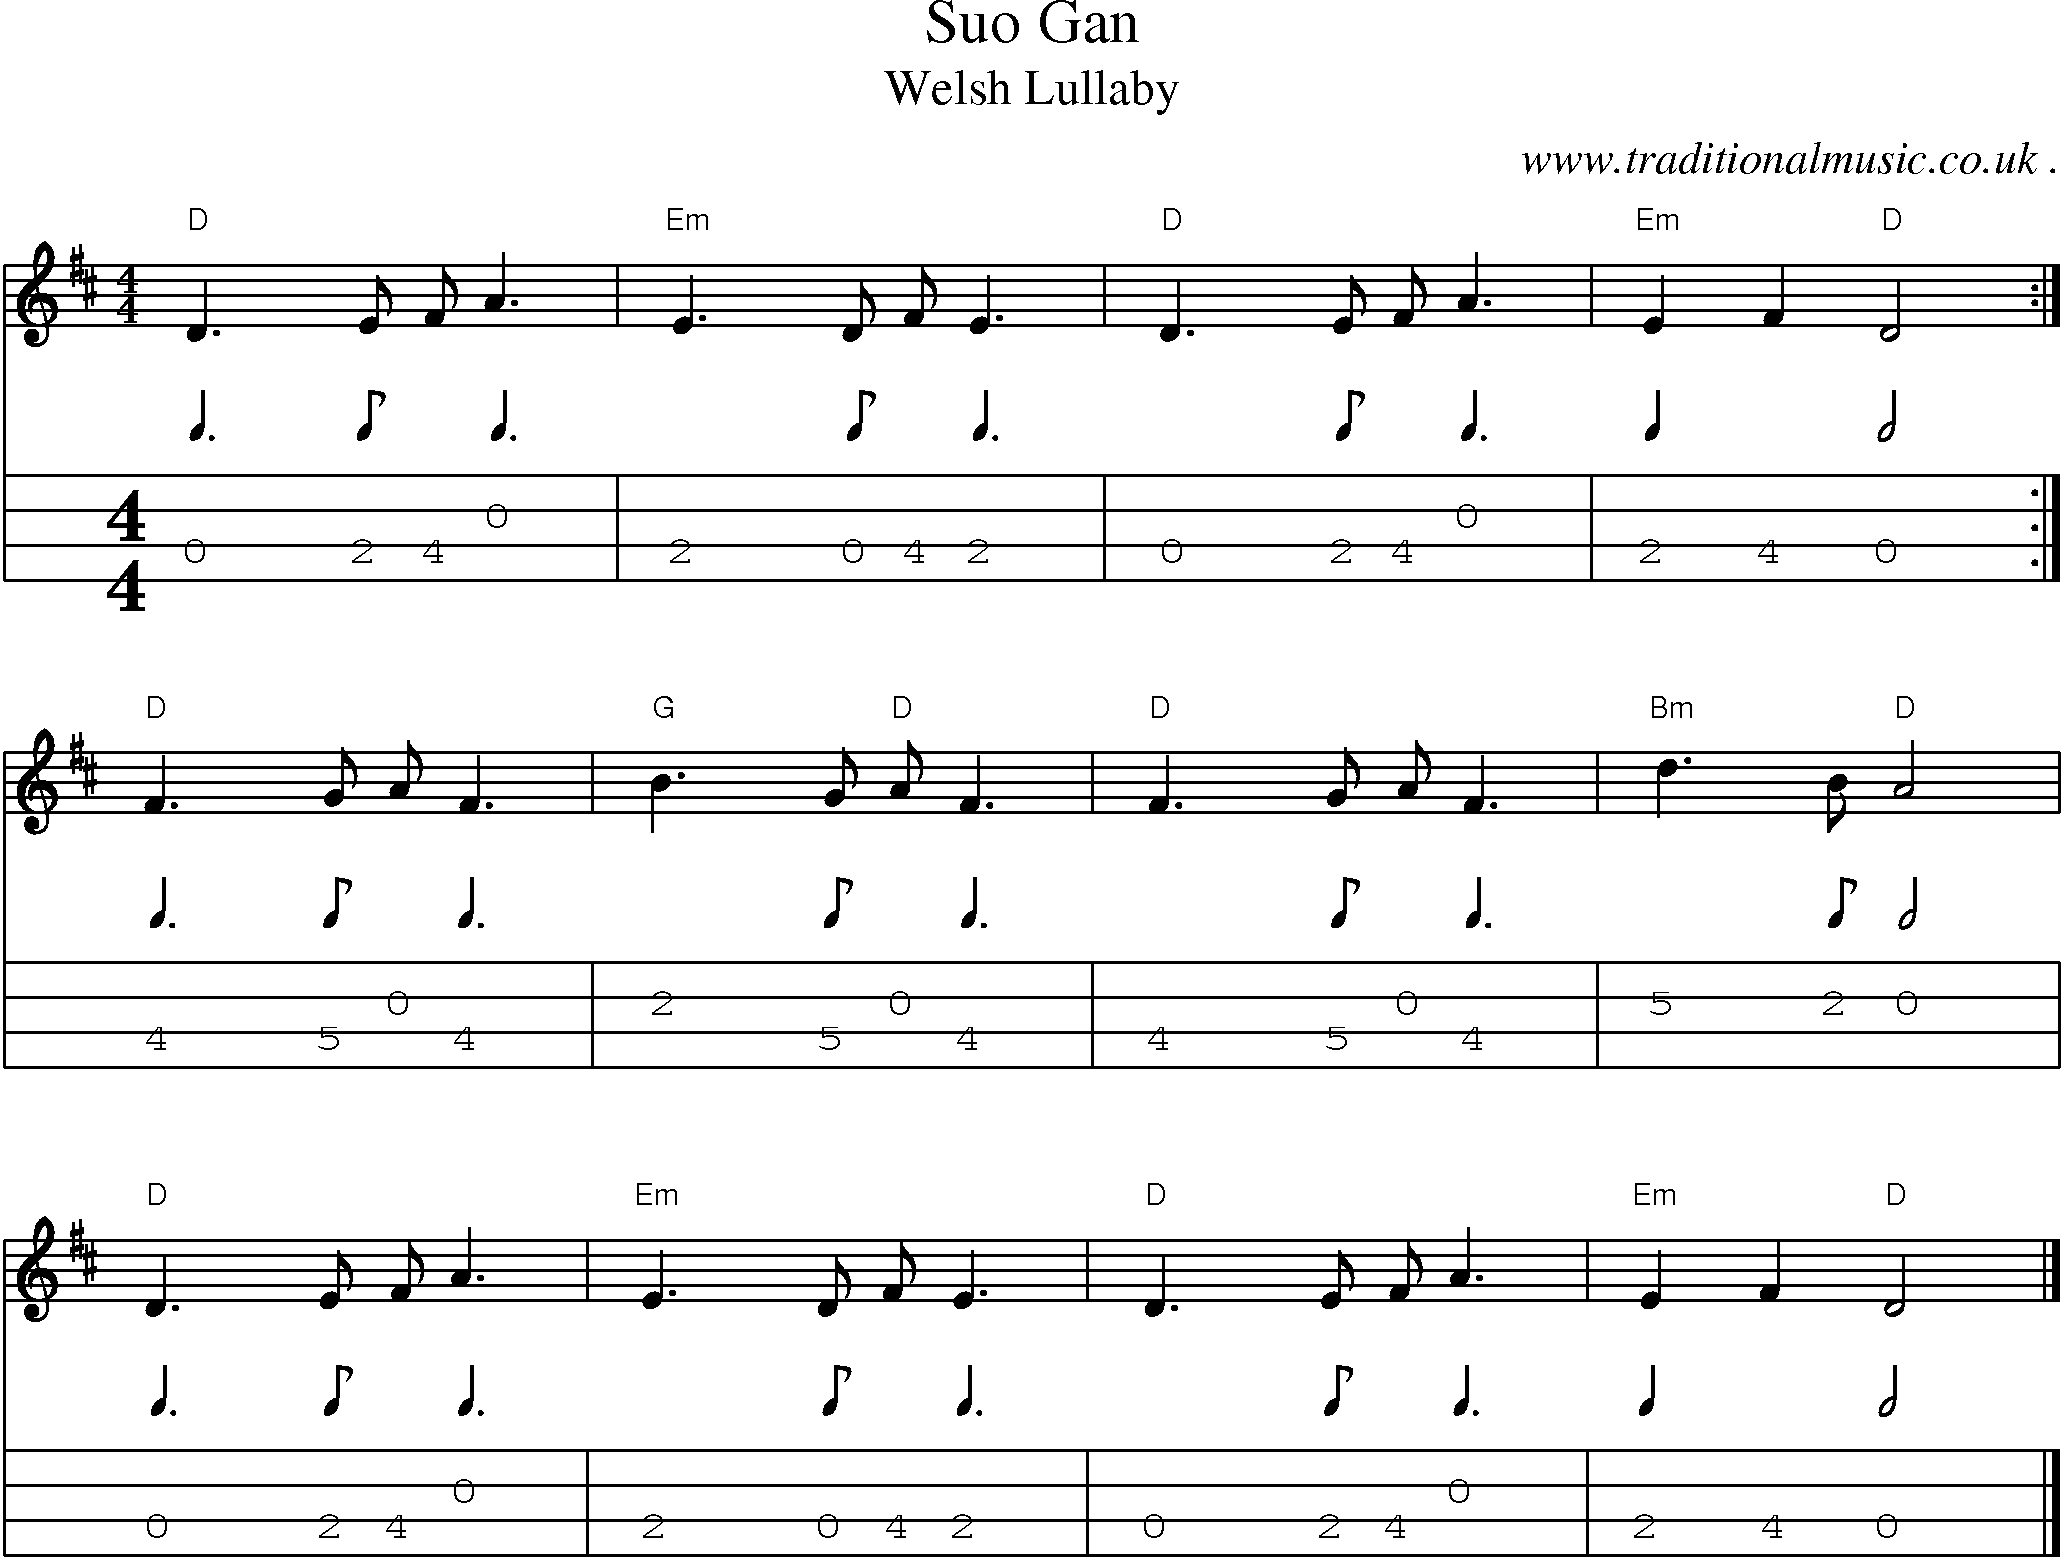 Music Score and Guitar Tabs for Suo Gan